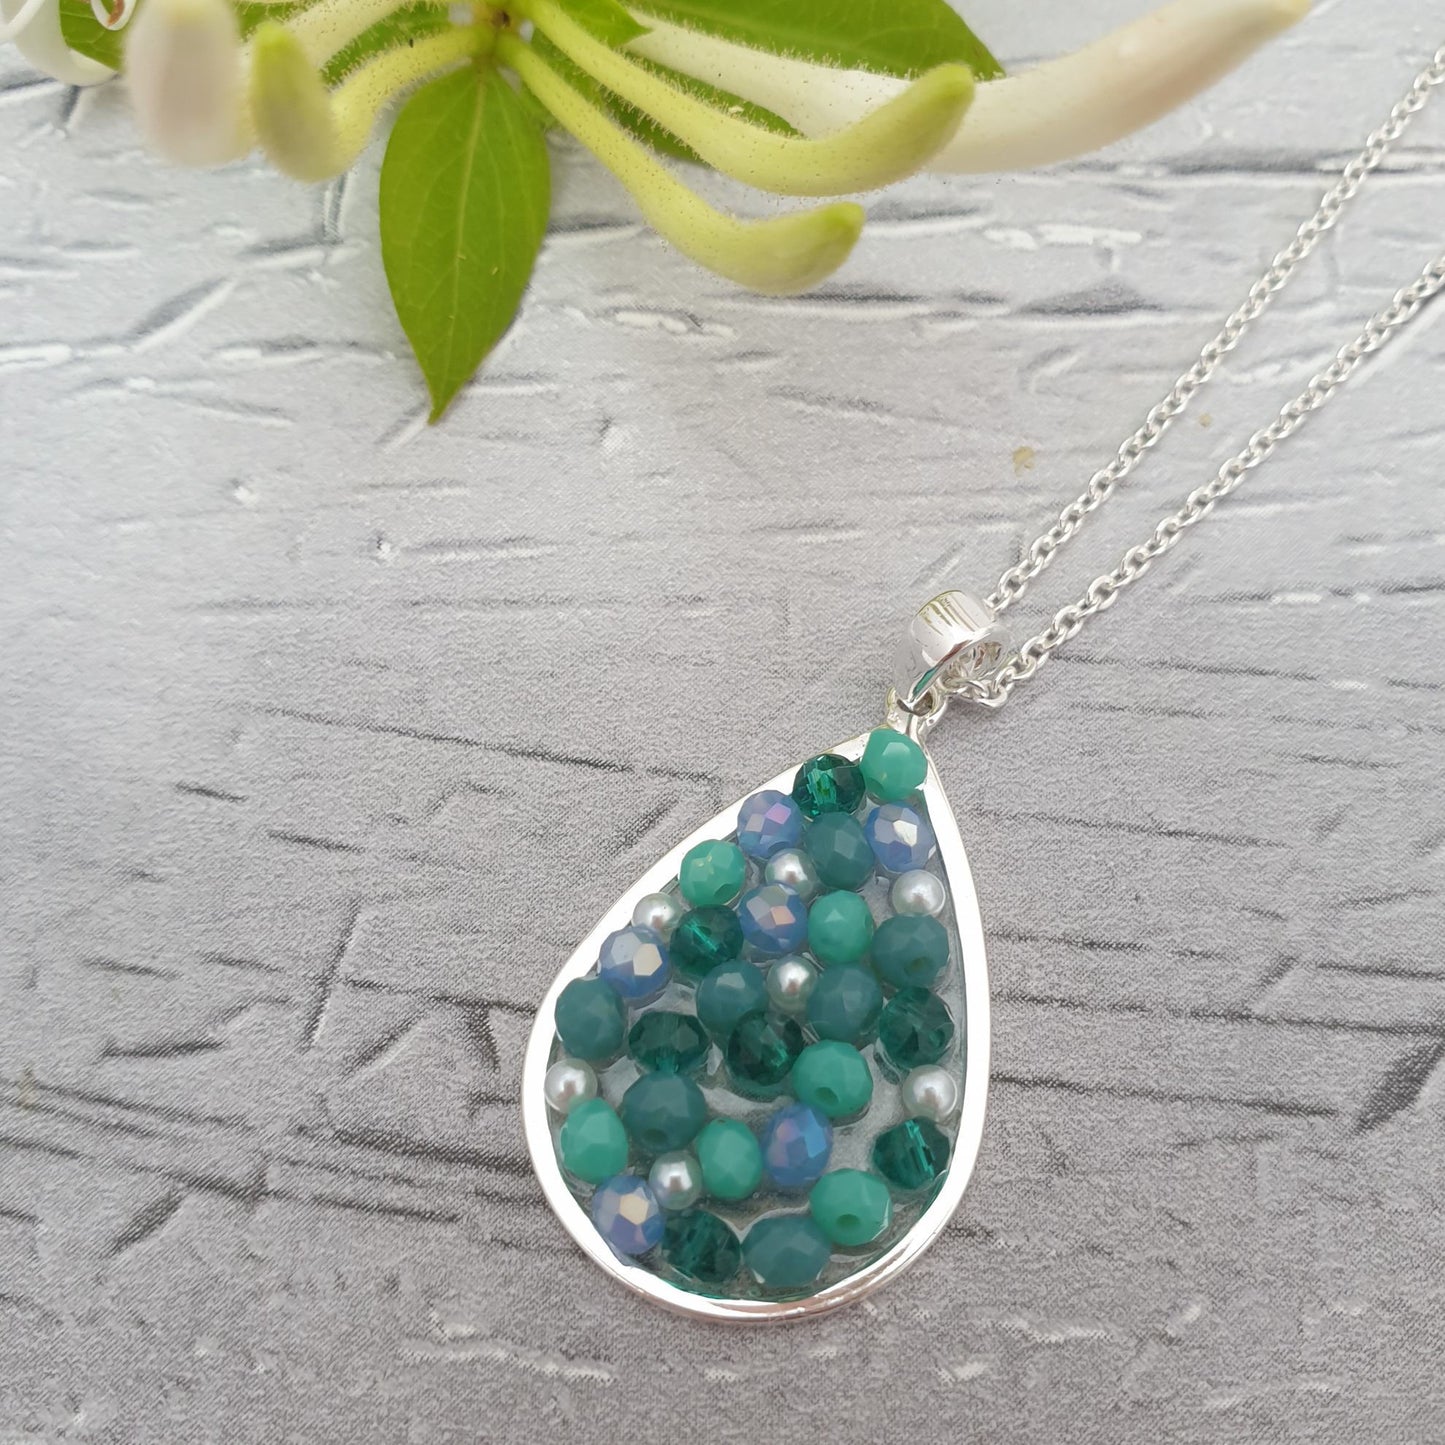 Photo of a Teardrop shaped  pendant necklace decorated with pearls, turquoise crystals and beads